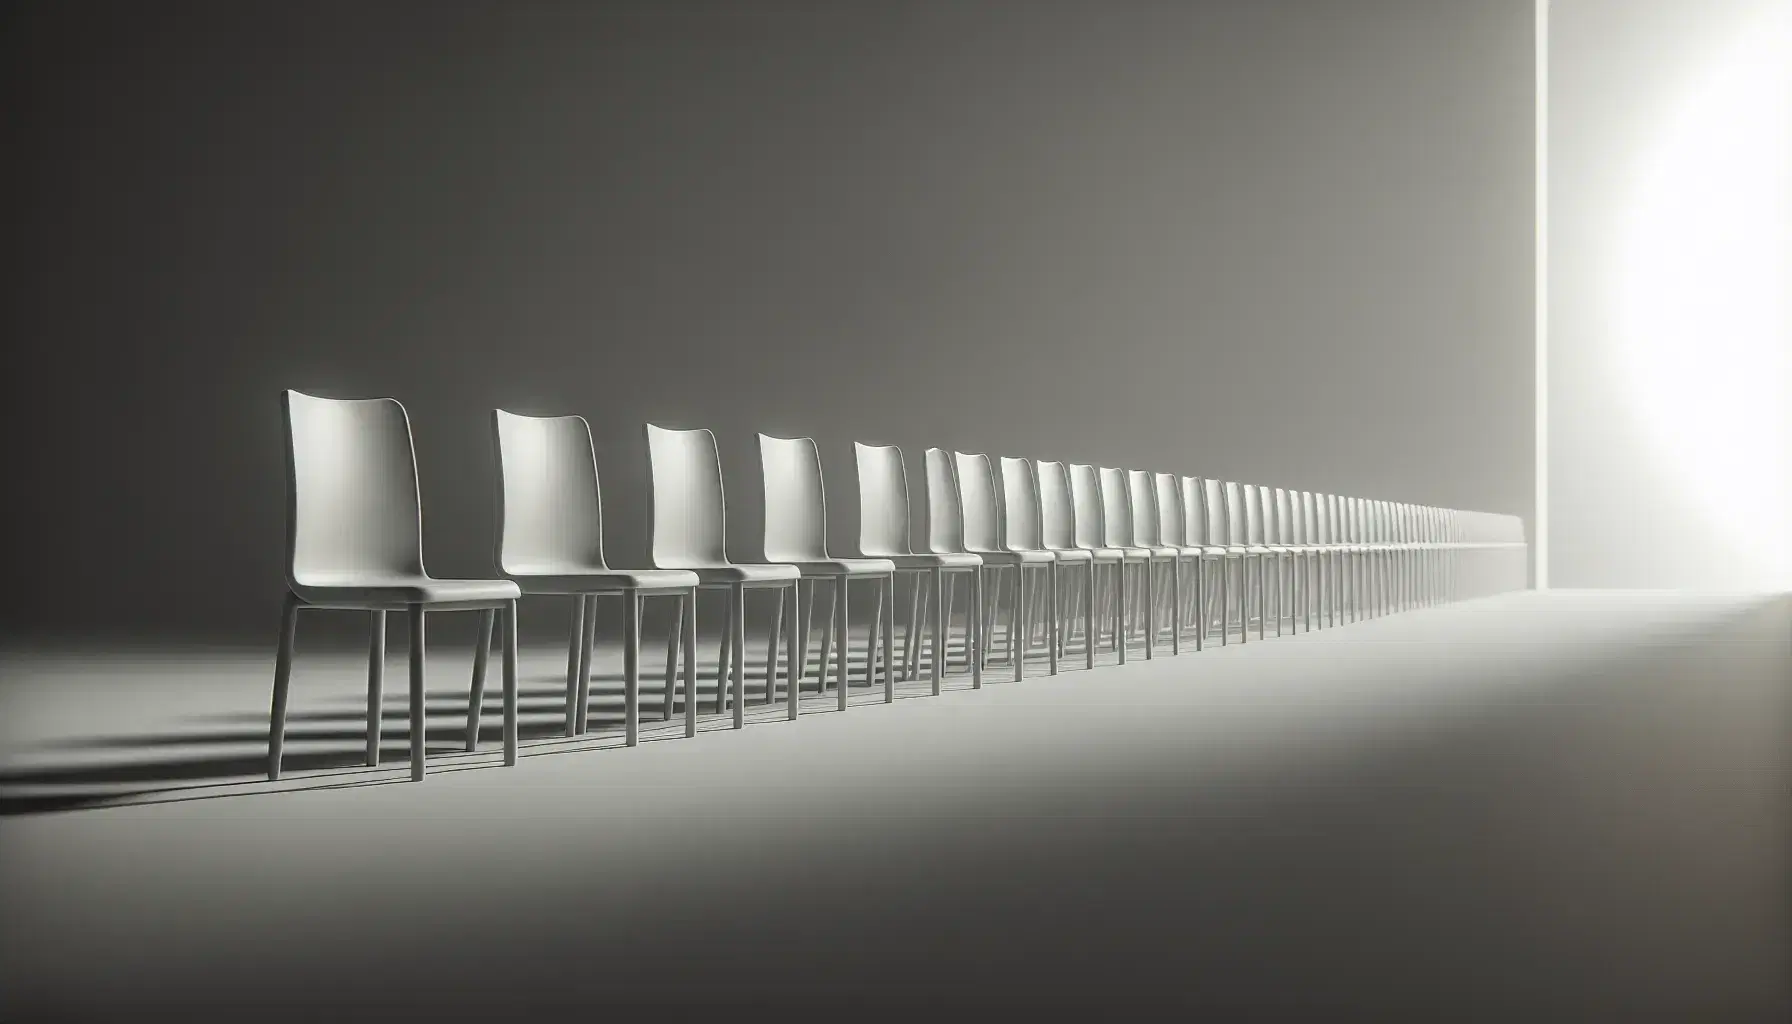 Identical white chairs lined up on dark gray flooring fade into the distance with soft lighting and light shadows.